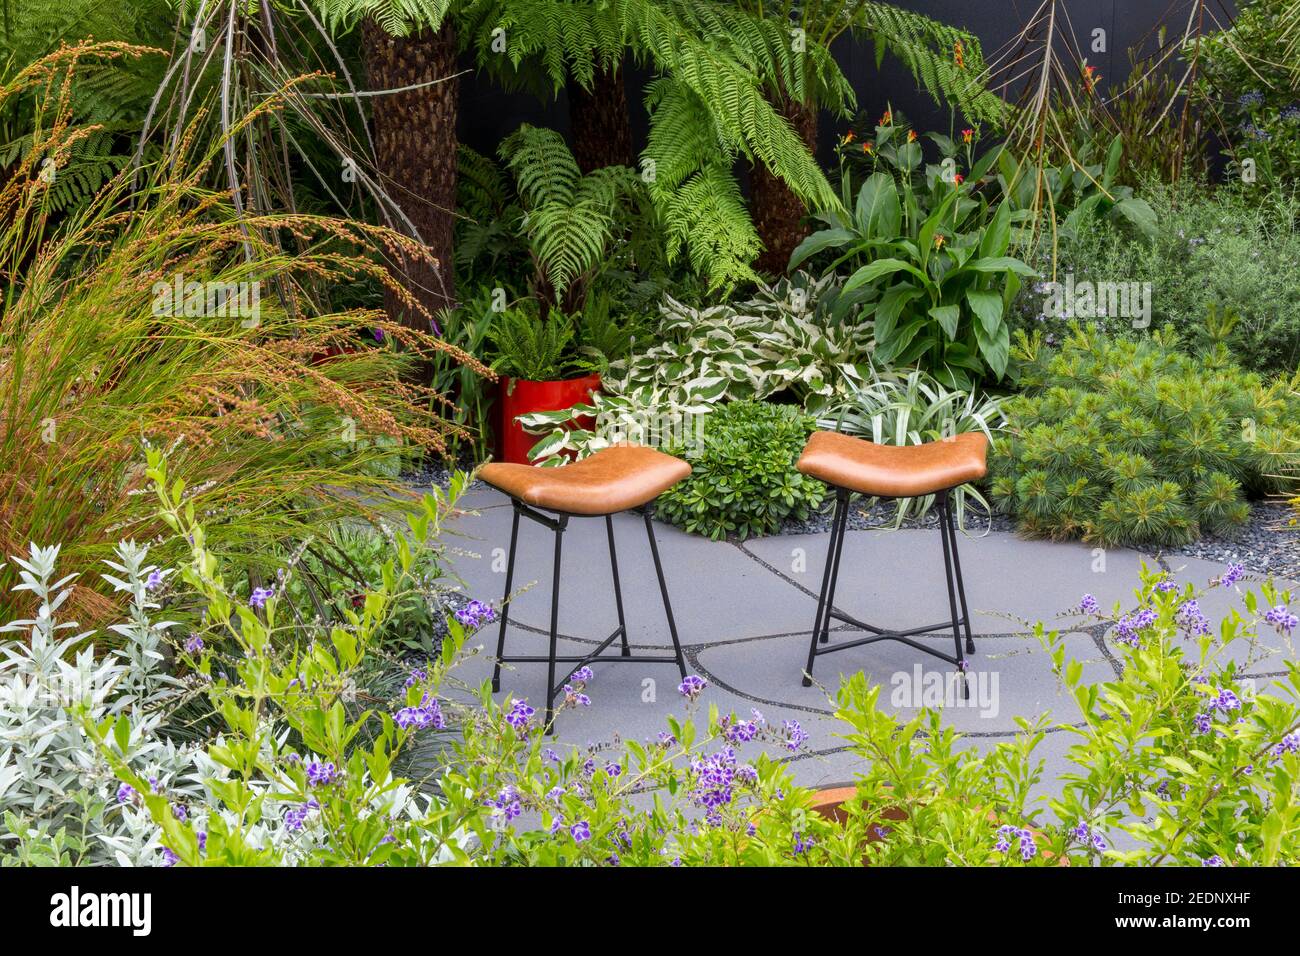 Modern garden seats on stone paving patio with a green garden border with tree ferns Dicksonia Antarctica and shade loving plants UK Stock Photo